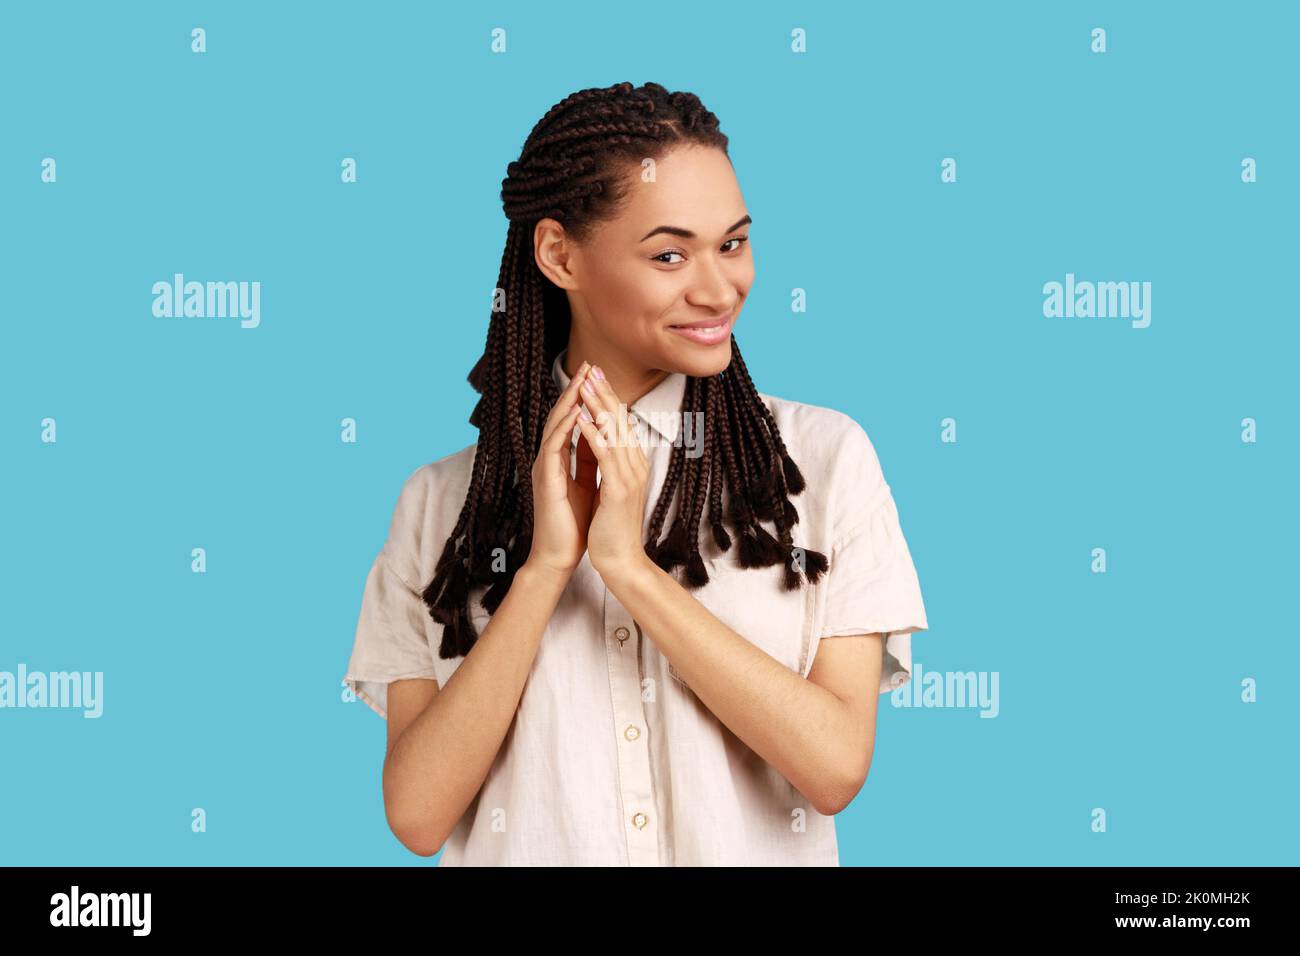 Portrait of thoughtful woman with black dreadlocks schemes something, keeps fingers together, considers over cunning plans, wearing white shirt. Indoor studio shot isolated on blue background. Stock Photo